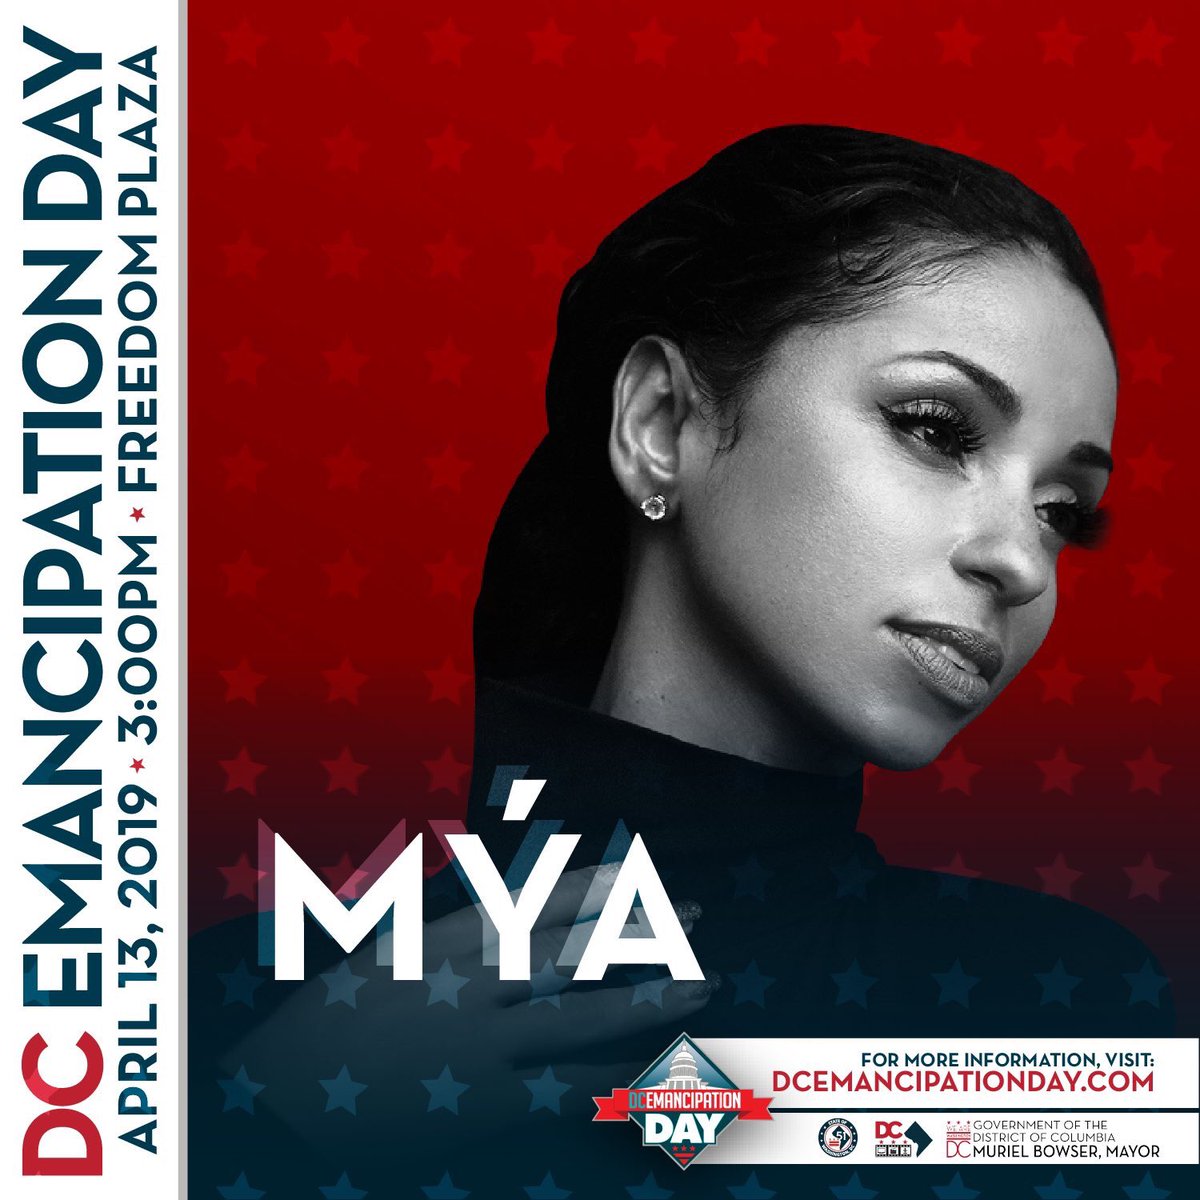 #Washington #DC 
See you this #Saturday #April13 @ #FreedomPlaza celebrating #DCEmancipationDay - the historic day when President Lincoln signed the Compensated  Emancipation, freeing 3,185 enslaved persons in Washington, DC. DCEMANCIPATIONDAY.COM
MYAMYA.COM/EVENTS